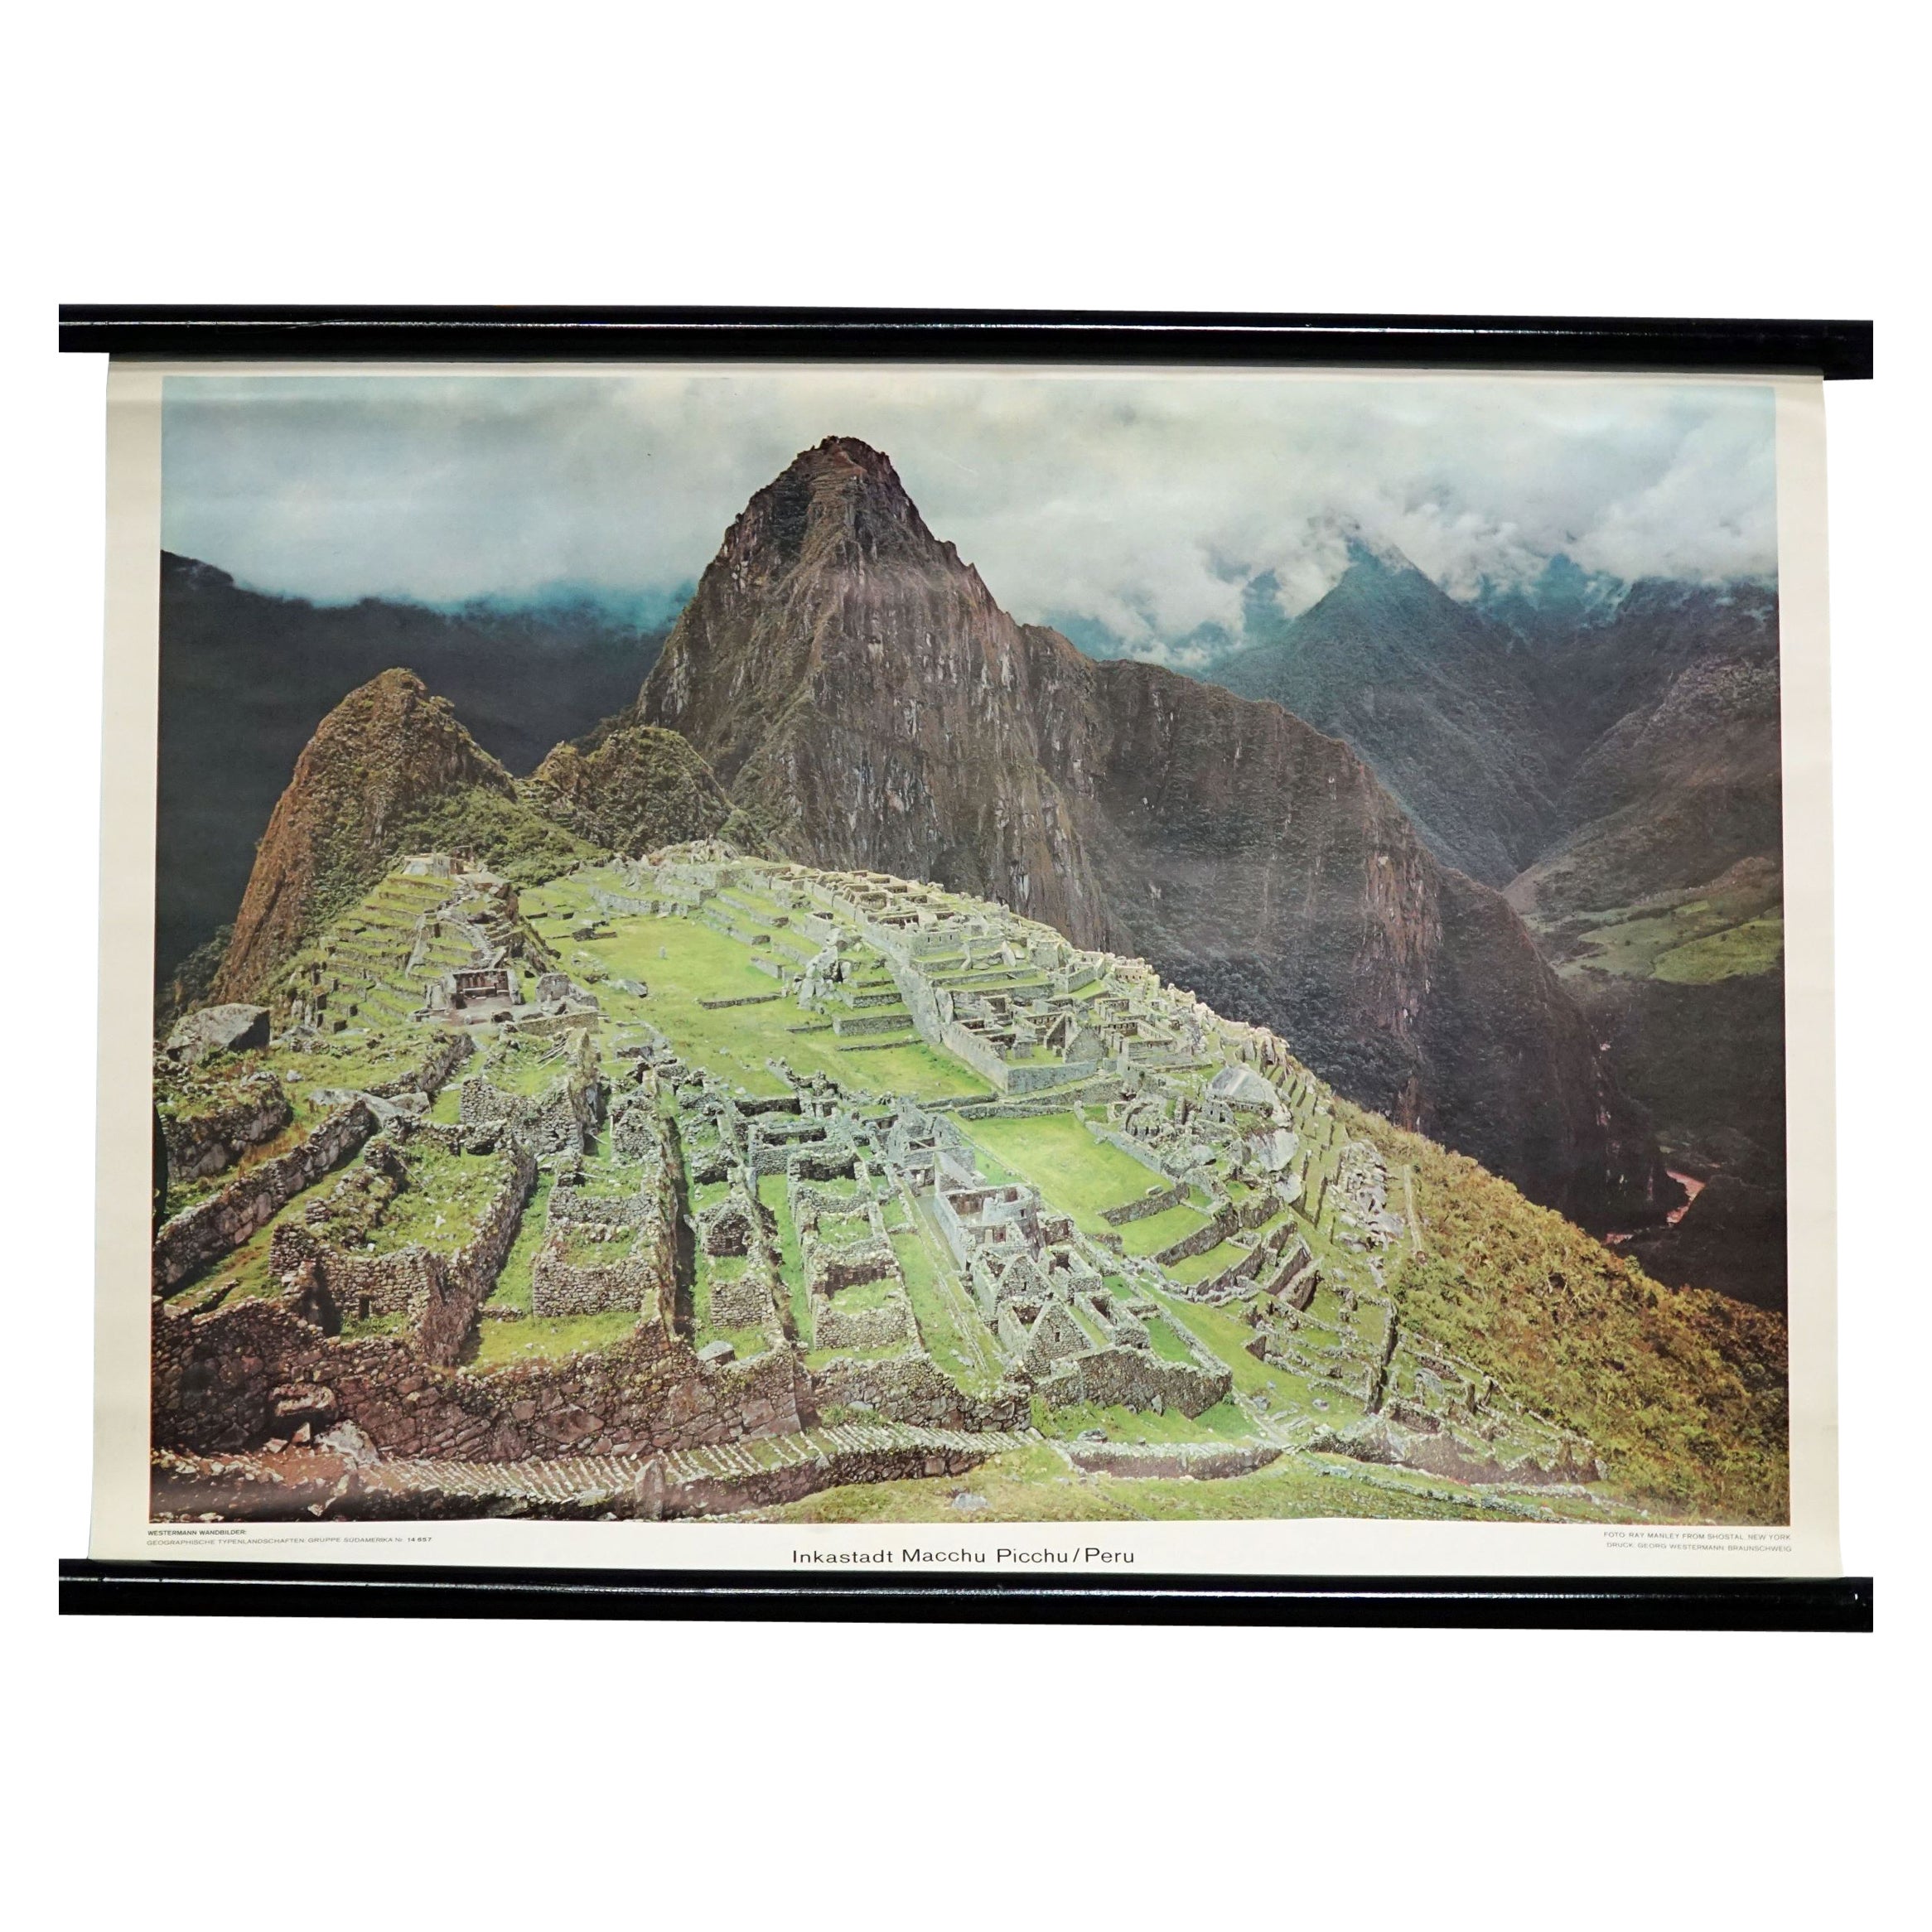 Macchu Picchu Inca City Peru Vintage Photo Poster Rollable Wall Chart For Sale